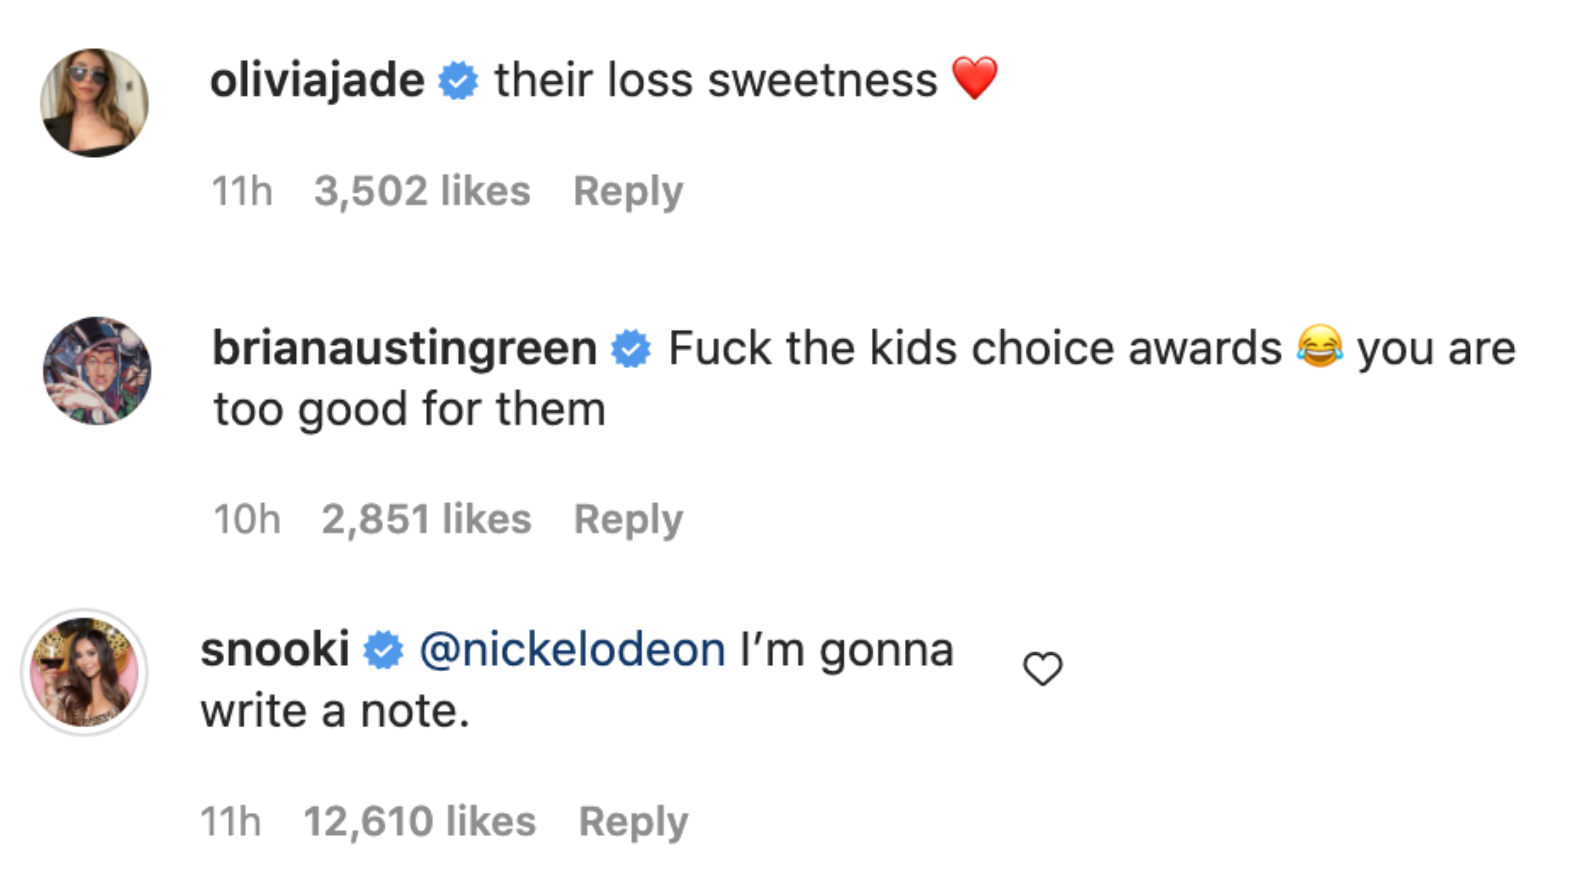 Olivia Jade said it was Nicklodeon&#x27;s loss, Brian Austin Green commented fuck the kids choice awards, and Snooki said she was gonne write a note